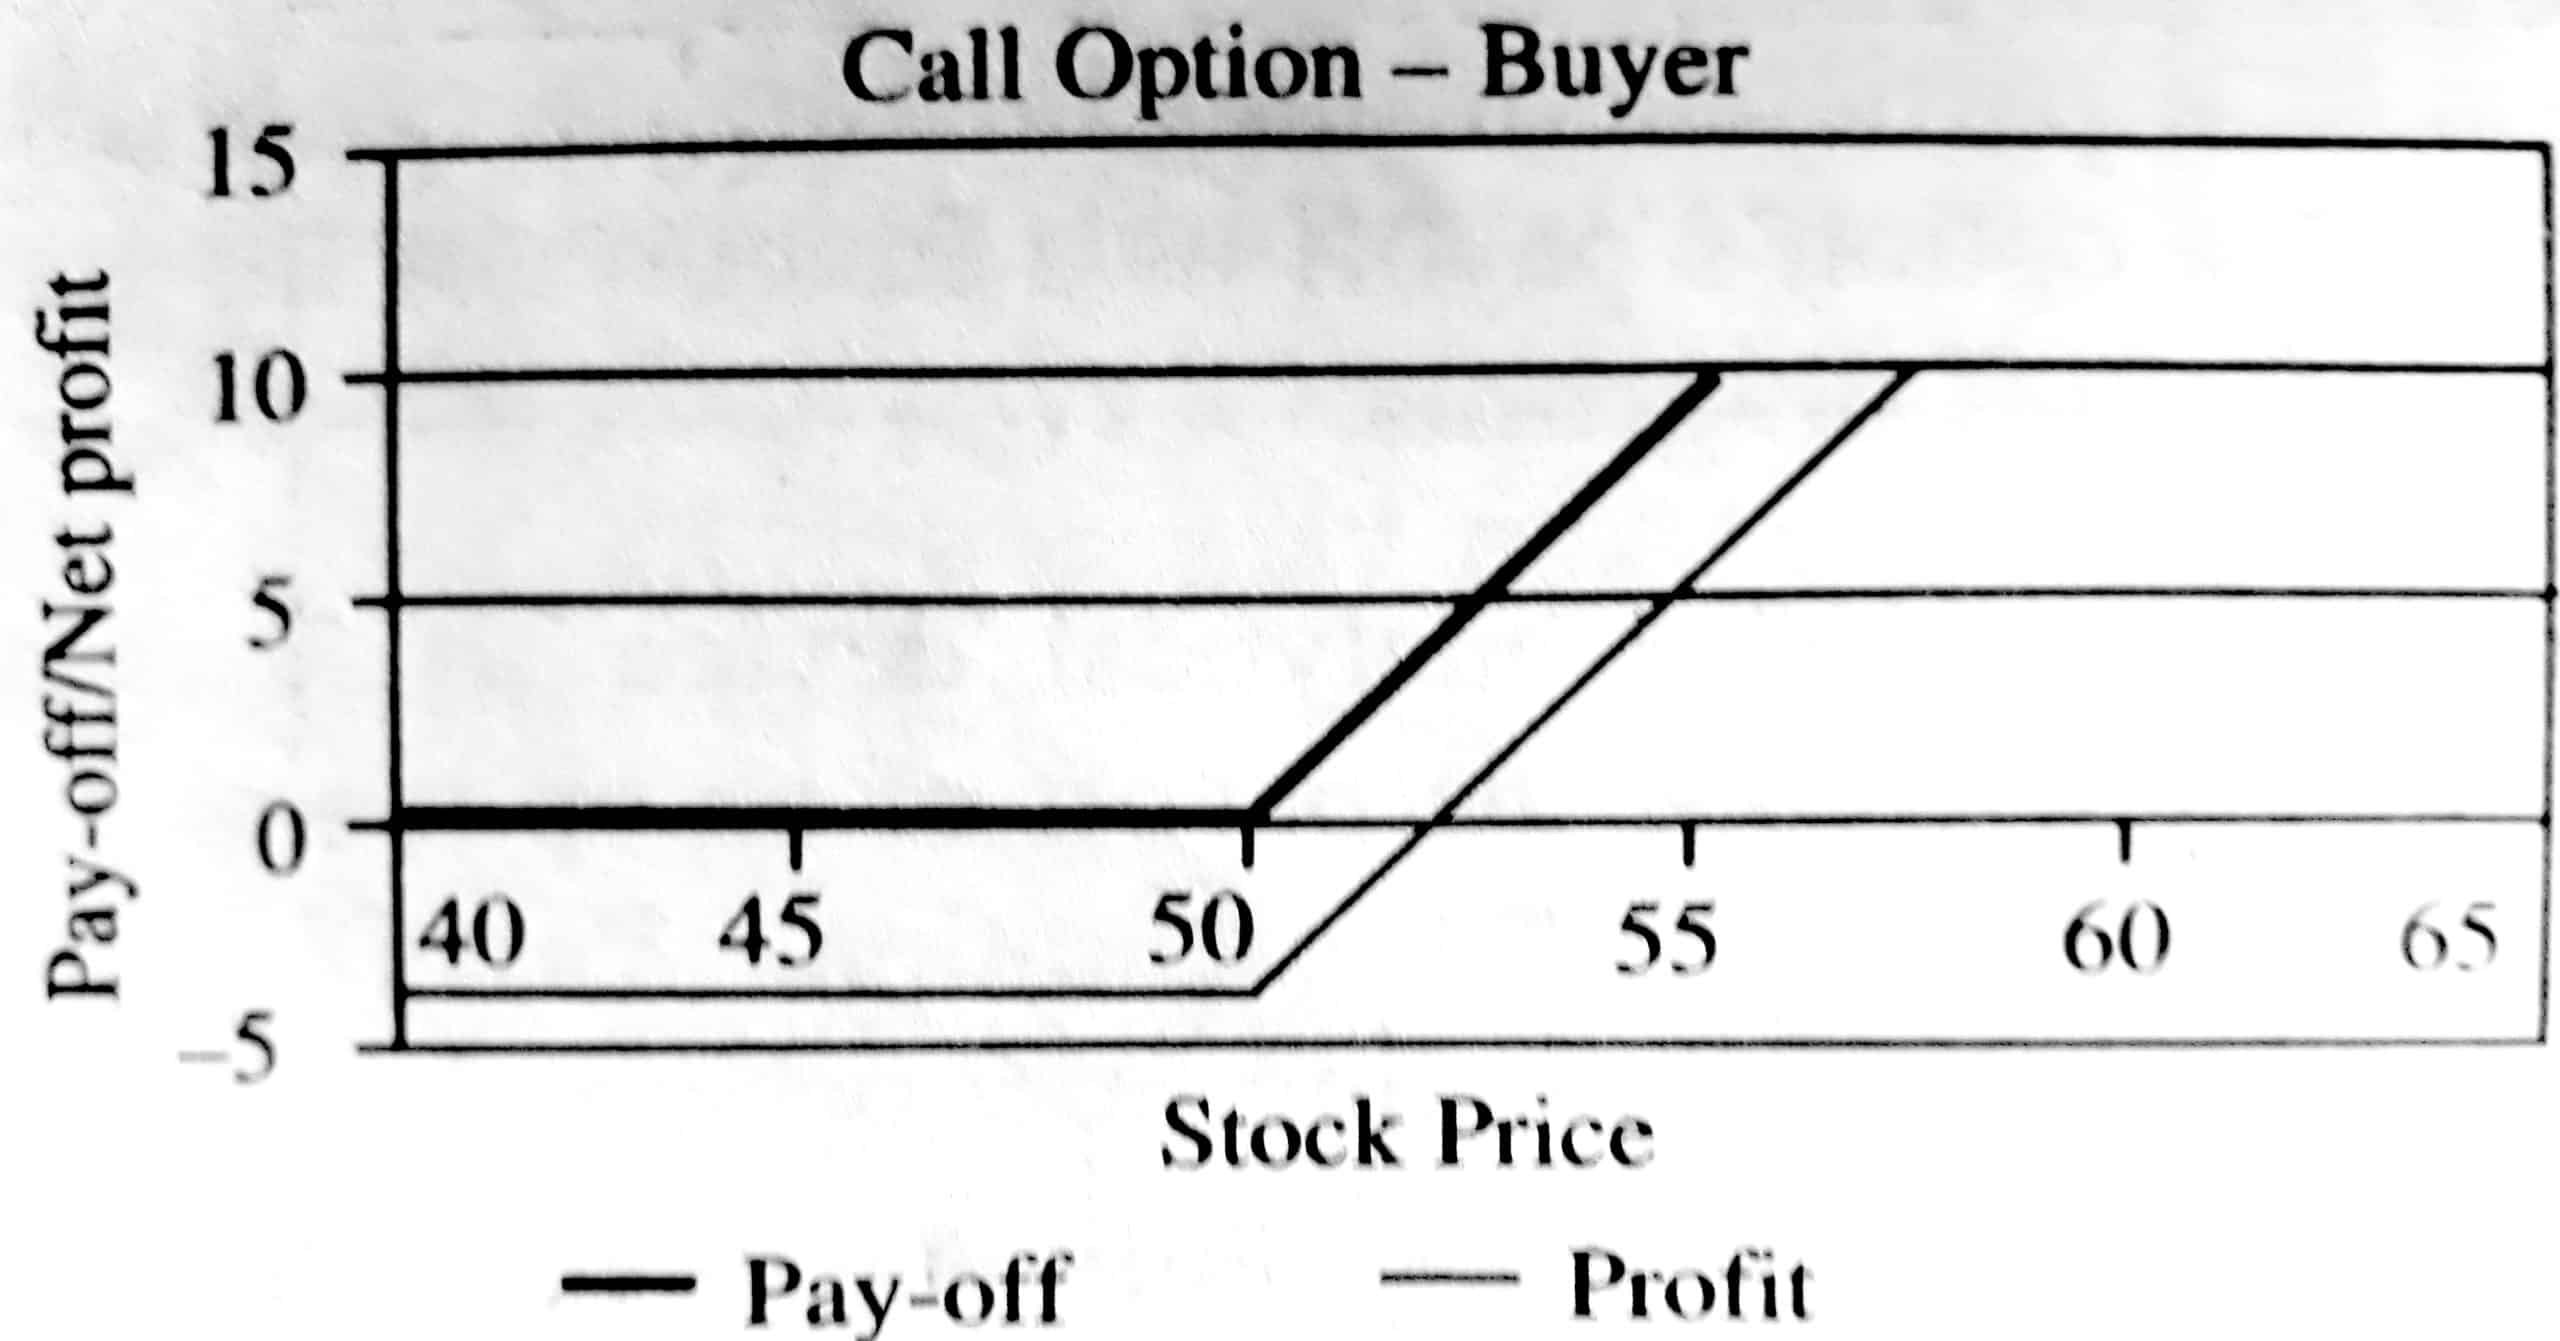 Pay-Off for the European Call Option Buyer at Expiry